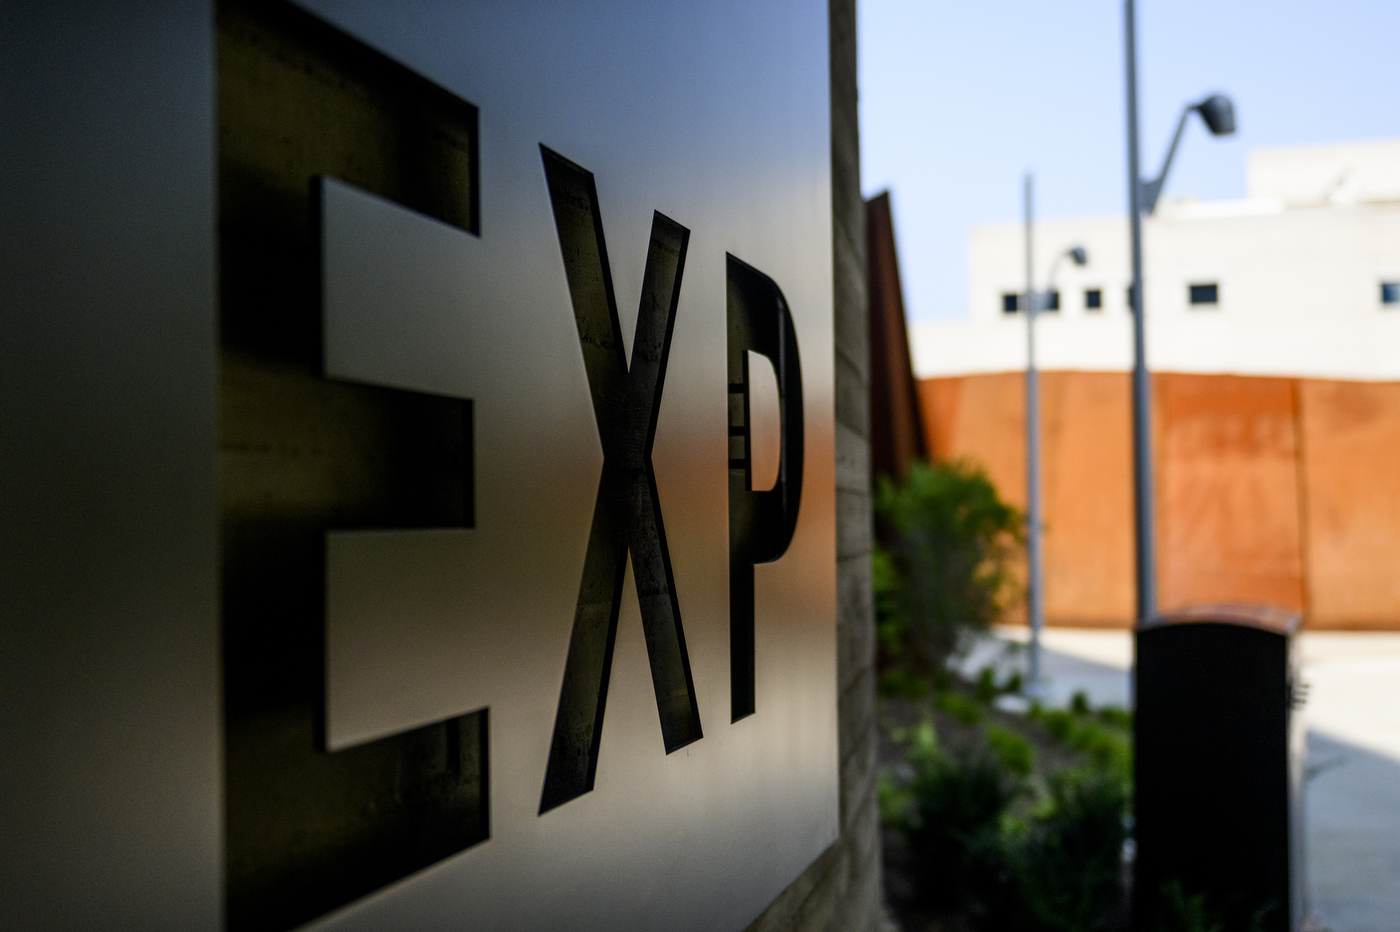 EXP lettering on the exterior of the building